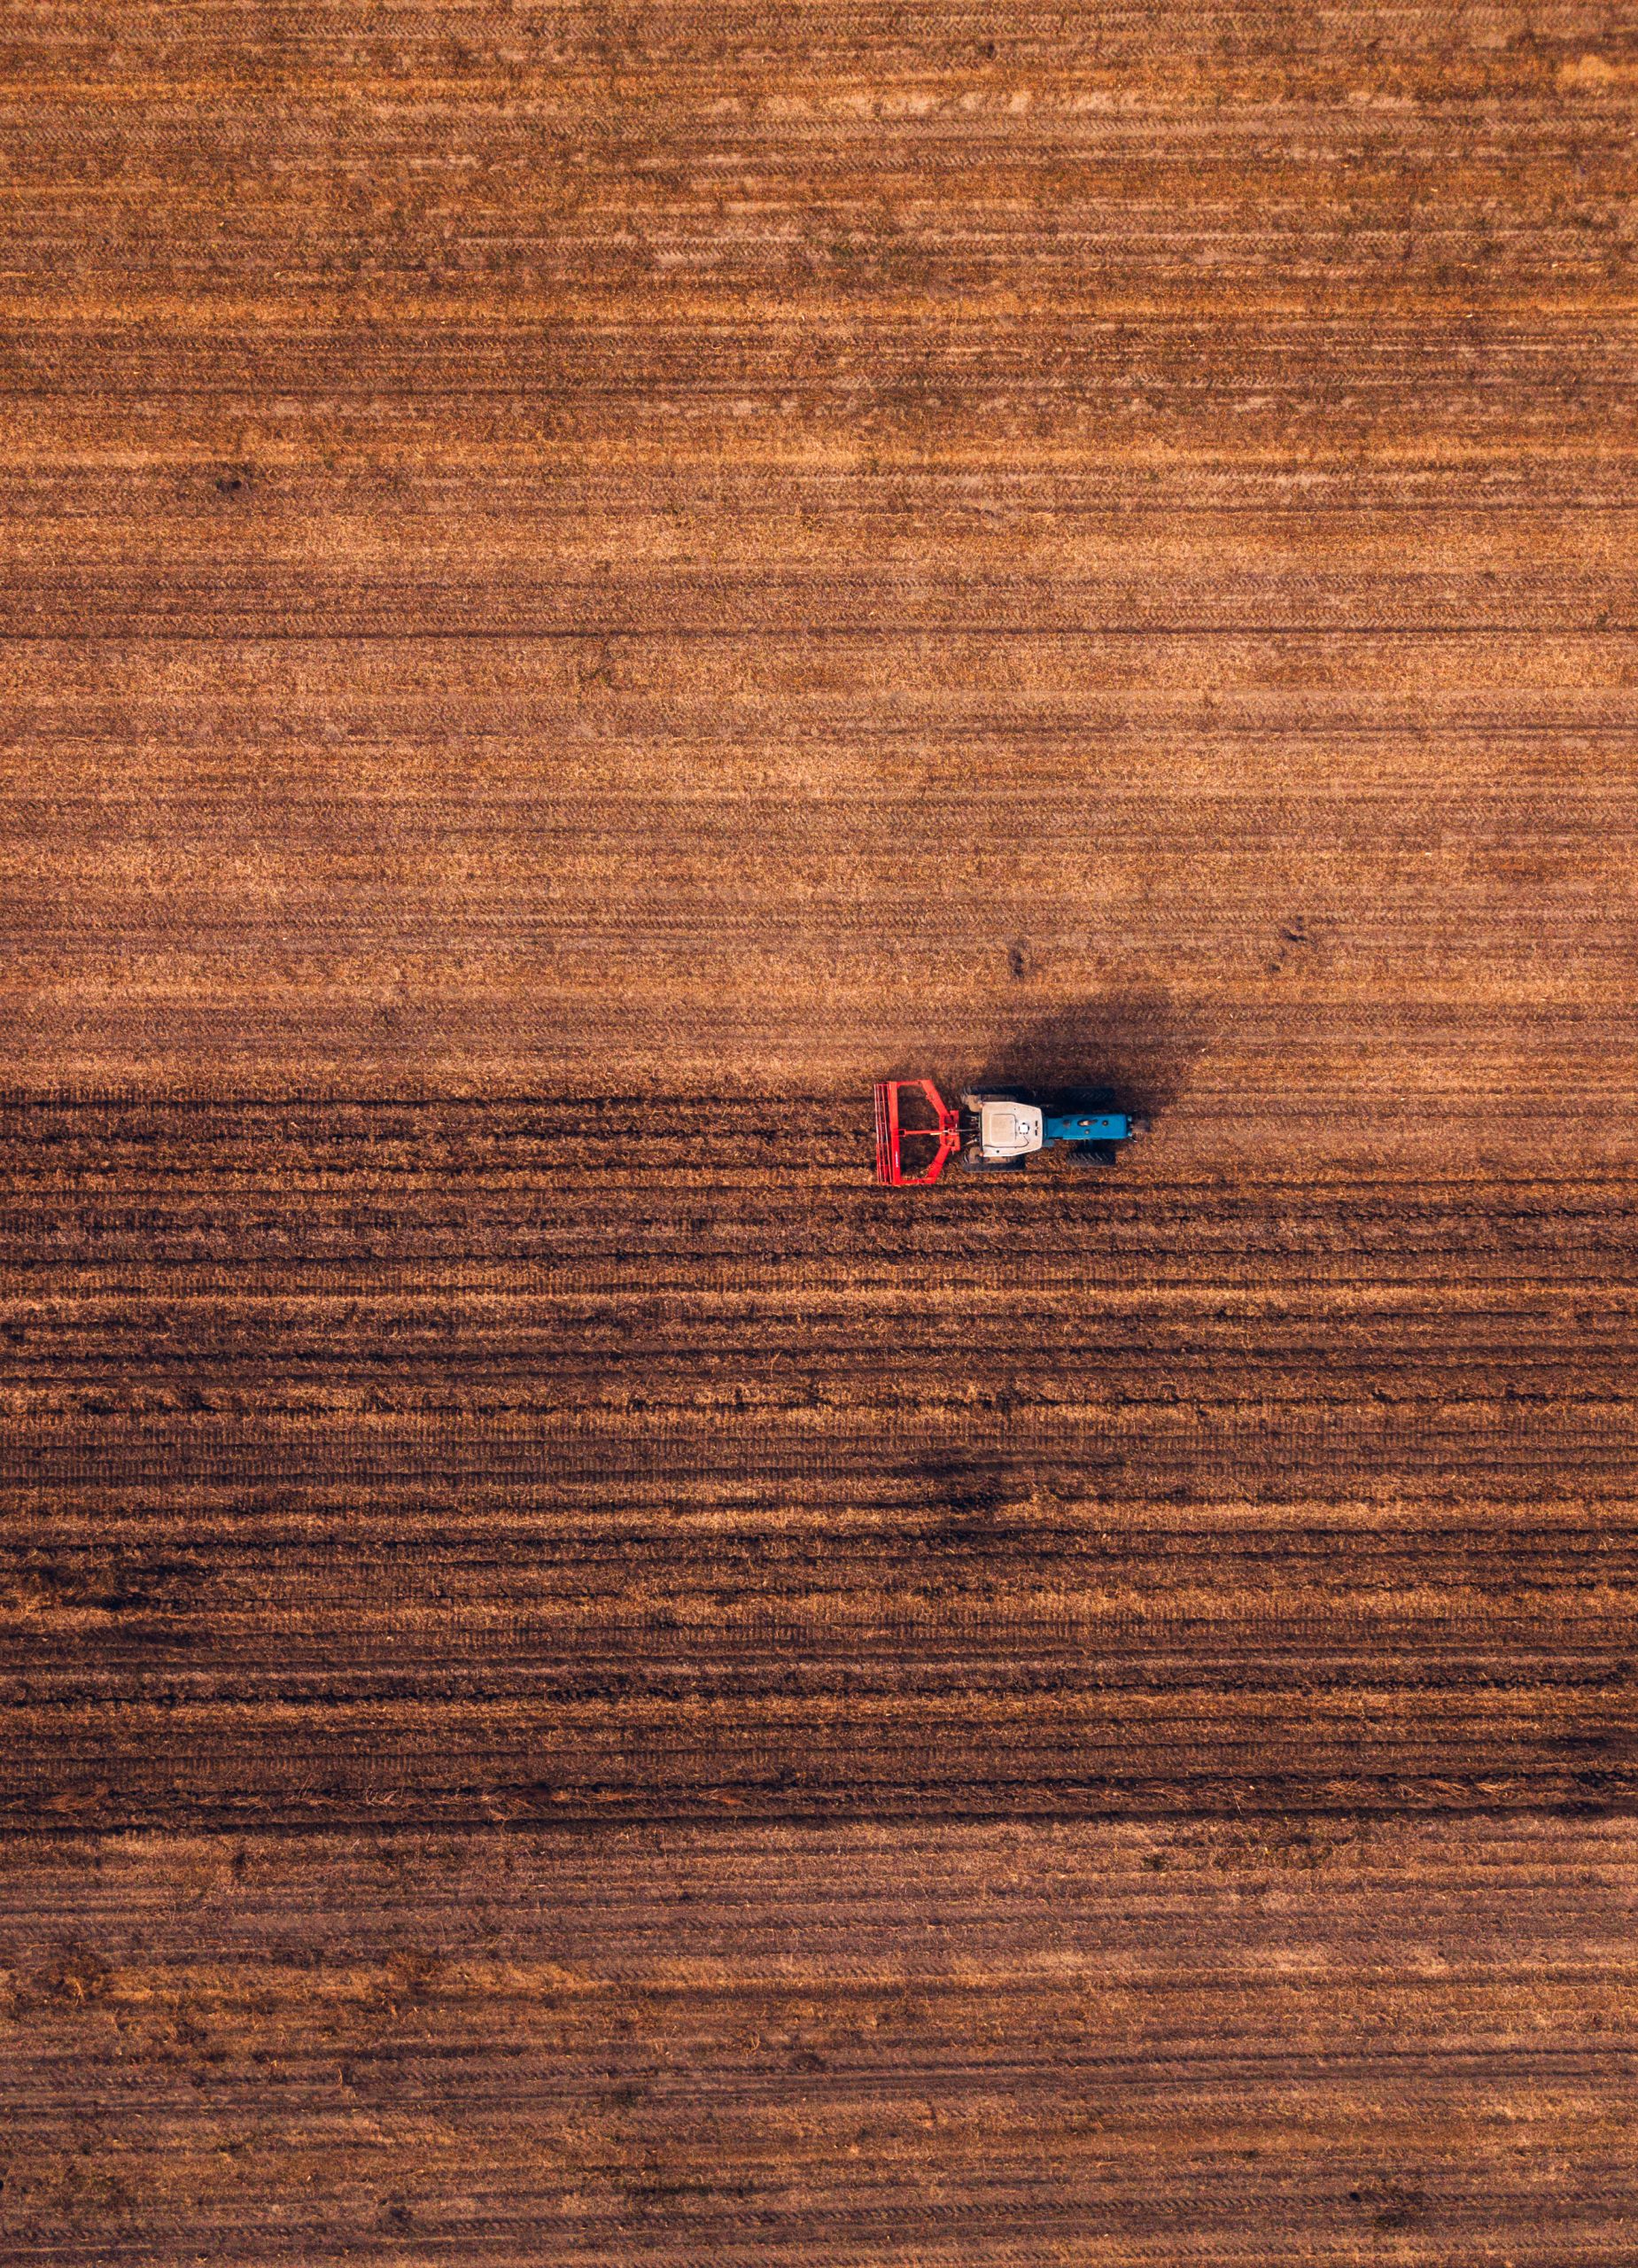 Aerial view of agricultural tractor doing stubble tillage in the field, top view from drone pov